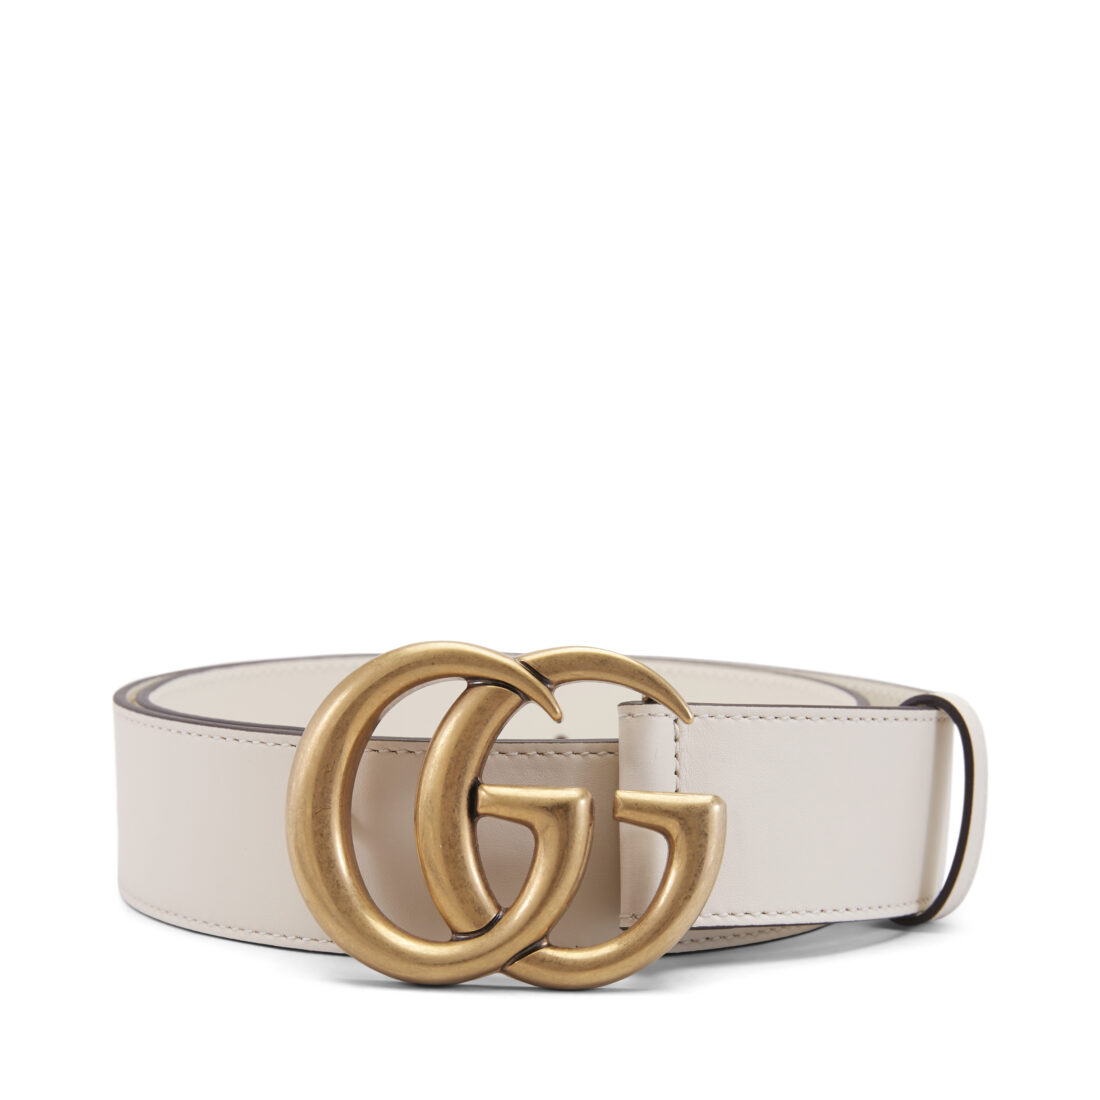 How Much is a Gucci Belt?